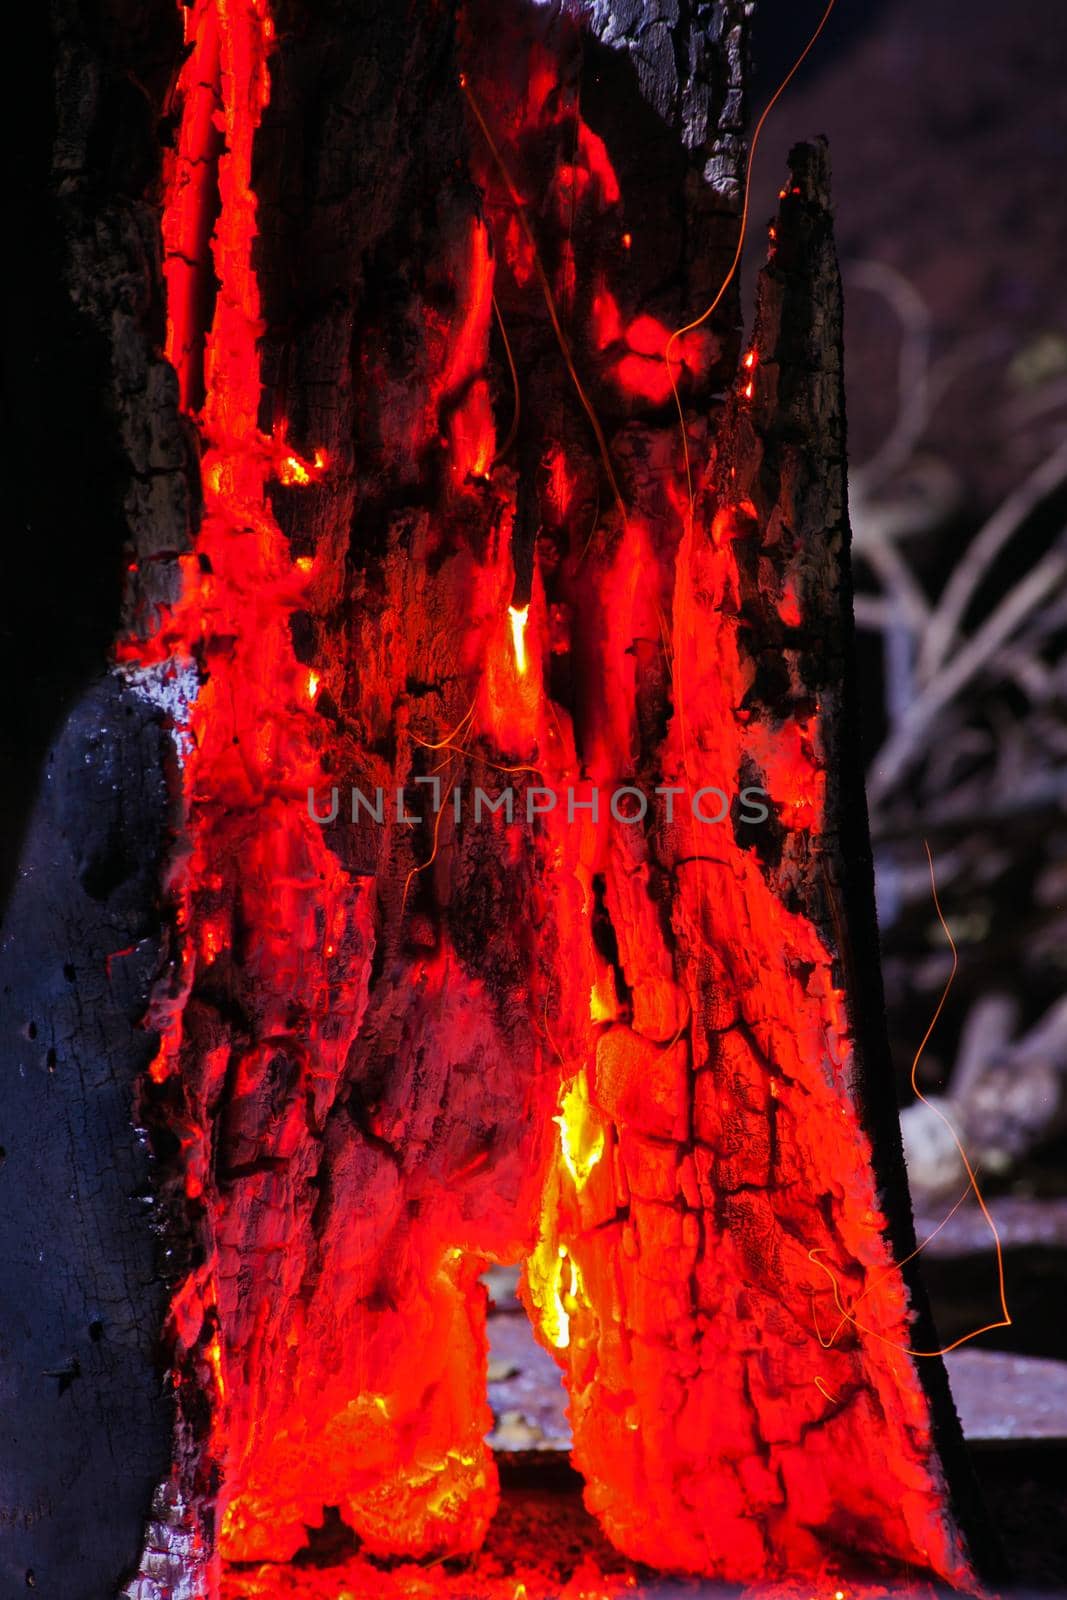 Smouldering Tree Trunk 11192 by kobus_peche